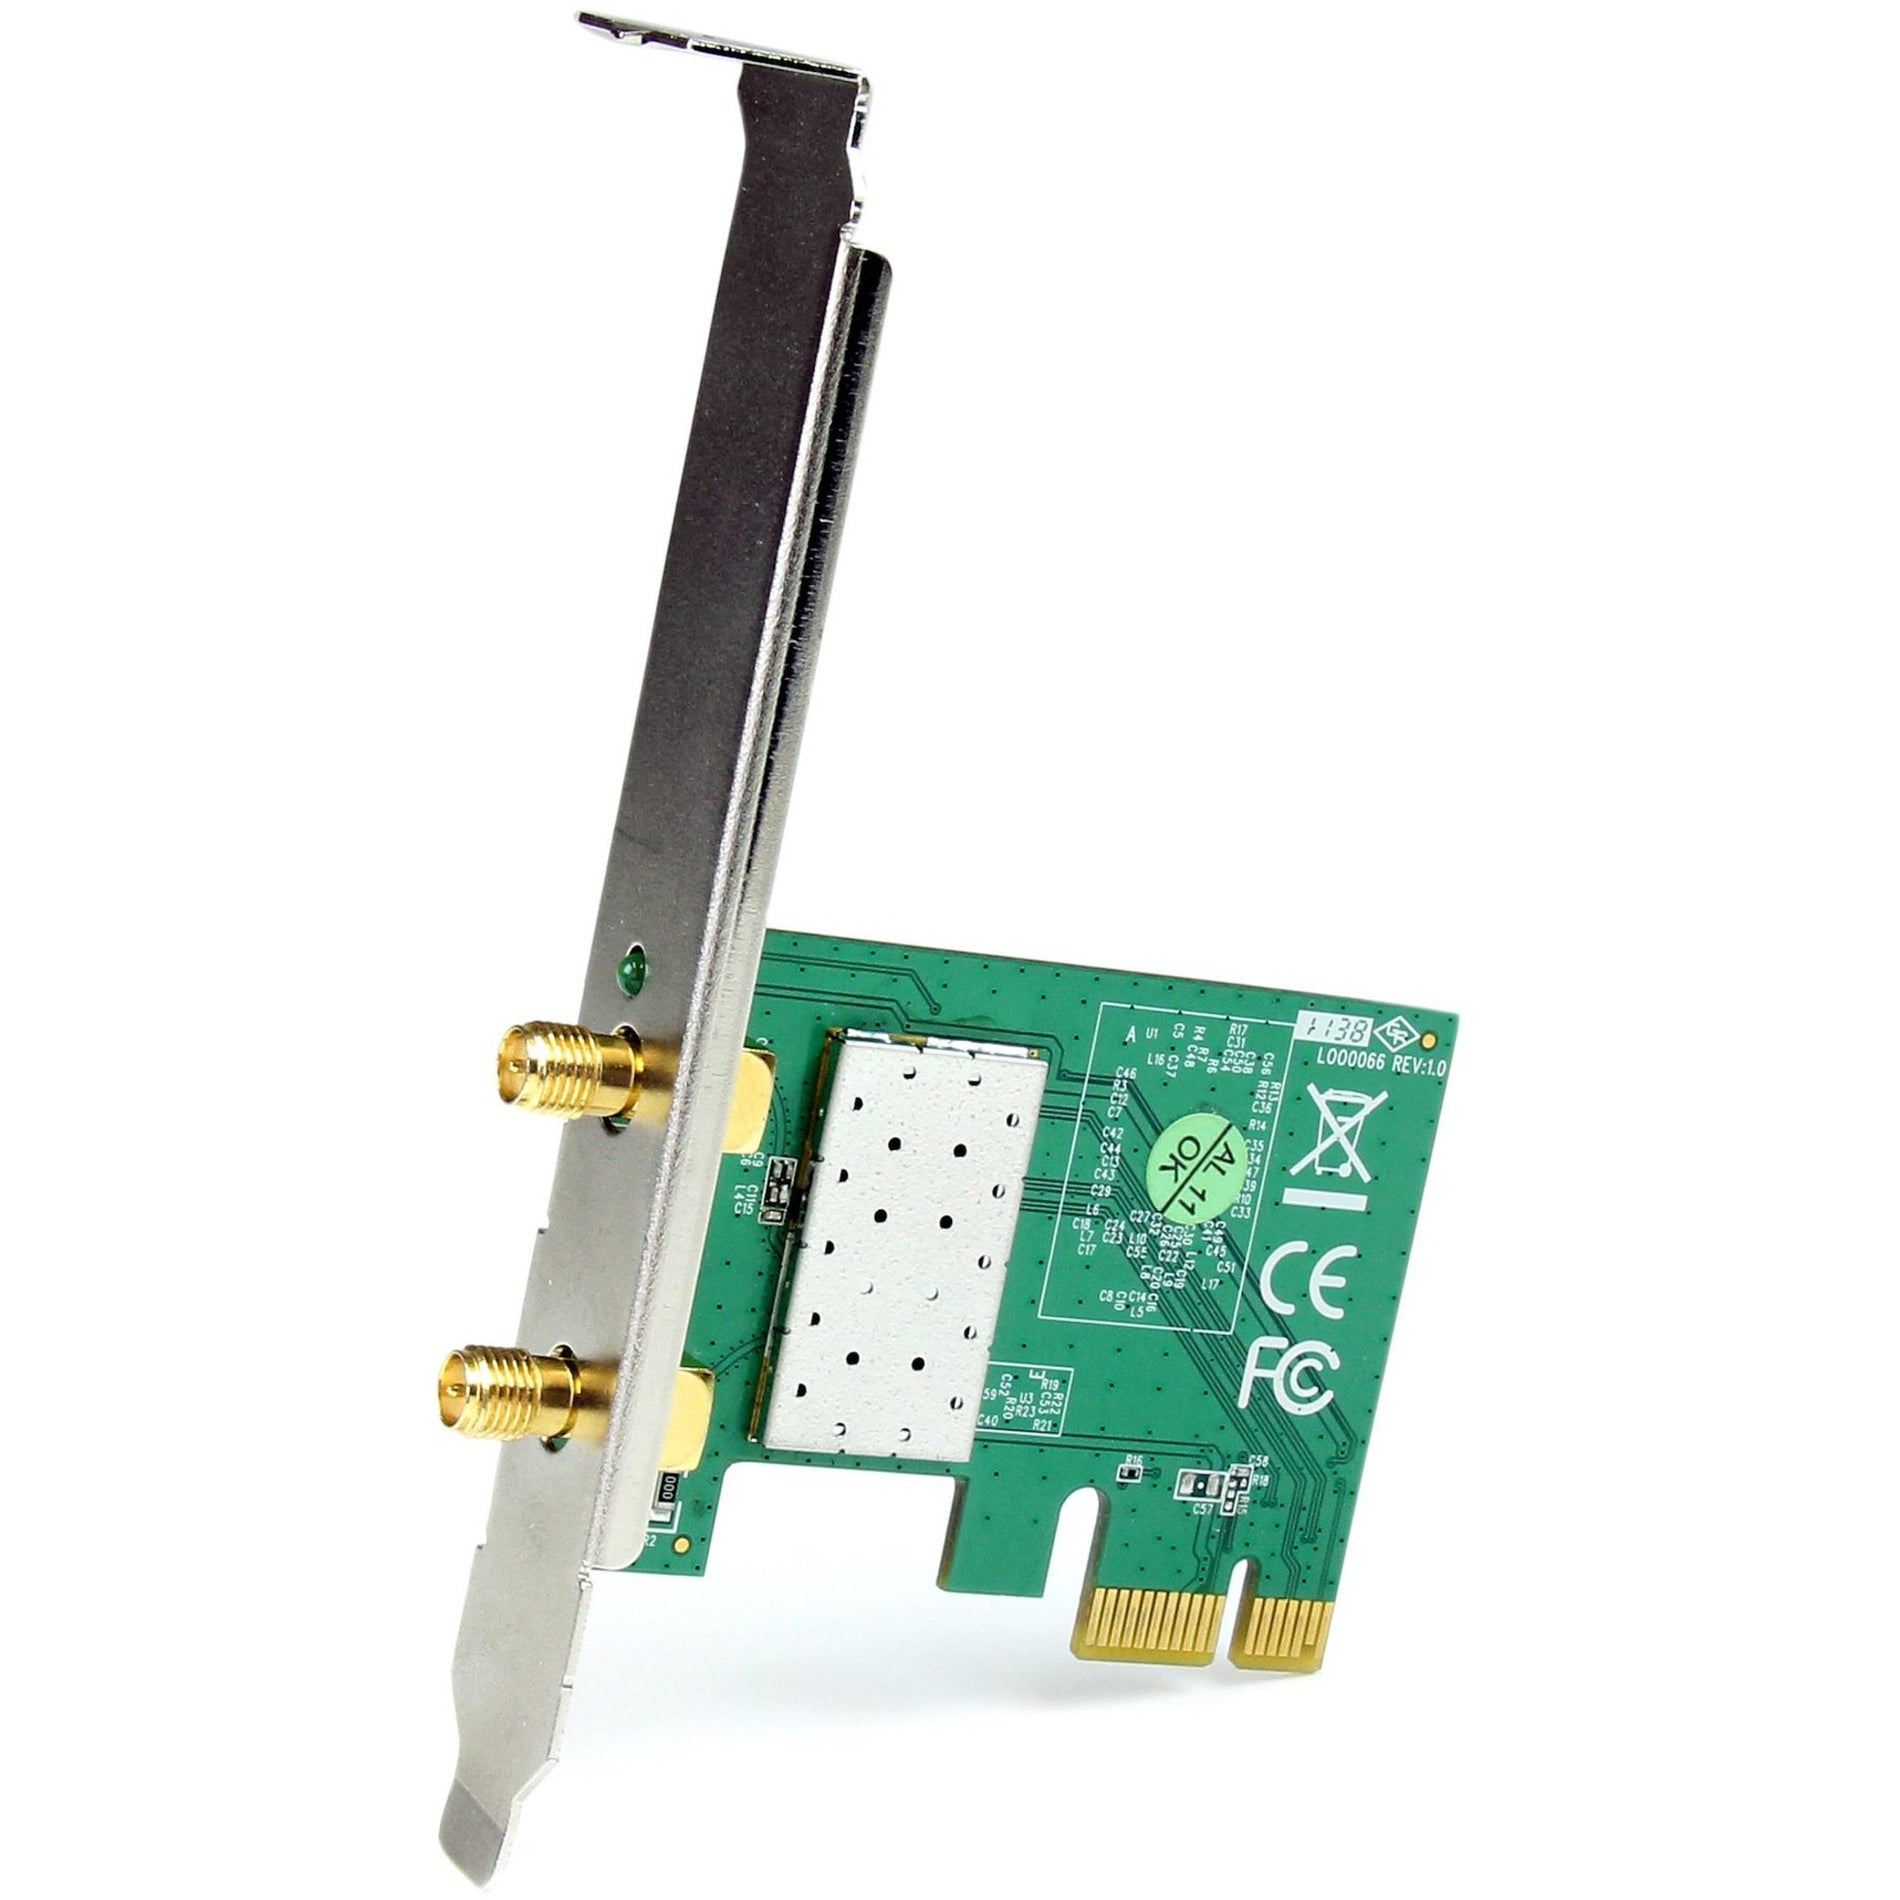 StarTech.com PEX300WN2X2 PCI Express Wireless N Adapter - 300 Mbps PCIe 802.11 b/g/n Network Adapter Card, Reliable Wi-Fi Connectivity for Desktop Computers